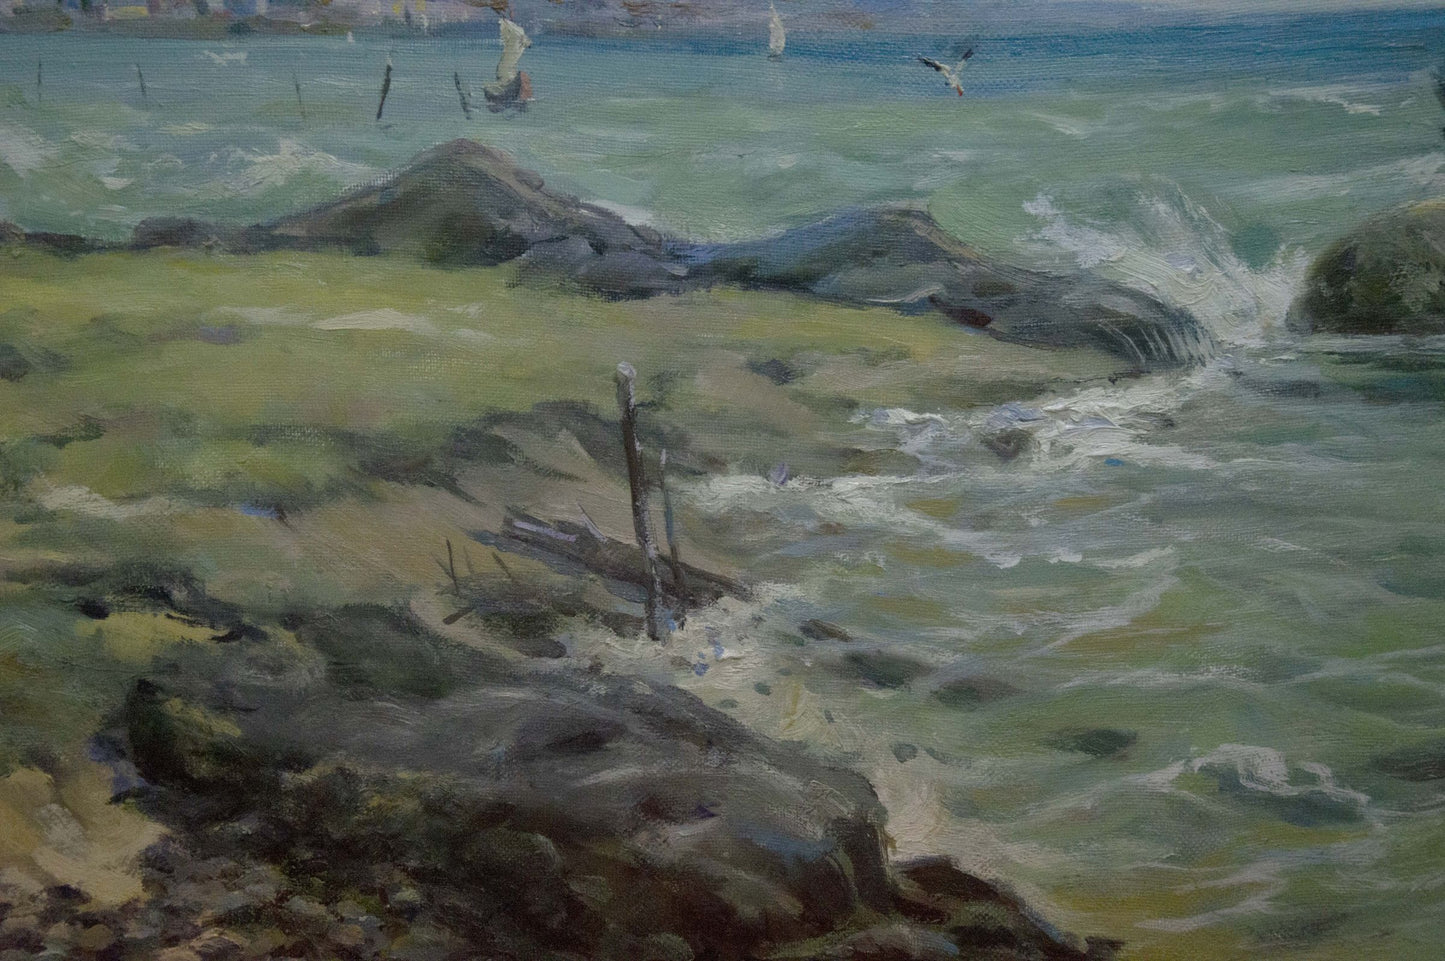 The oil painting "Seaside Serenity" by Victor Nikolaevich Shkurinsky.